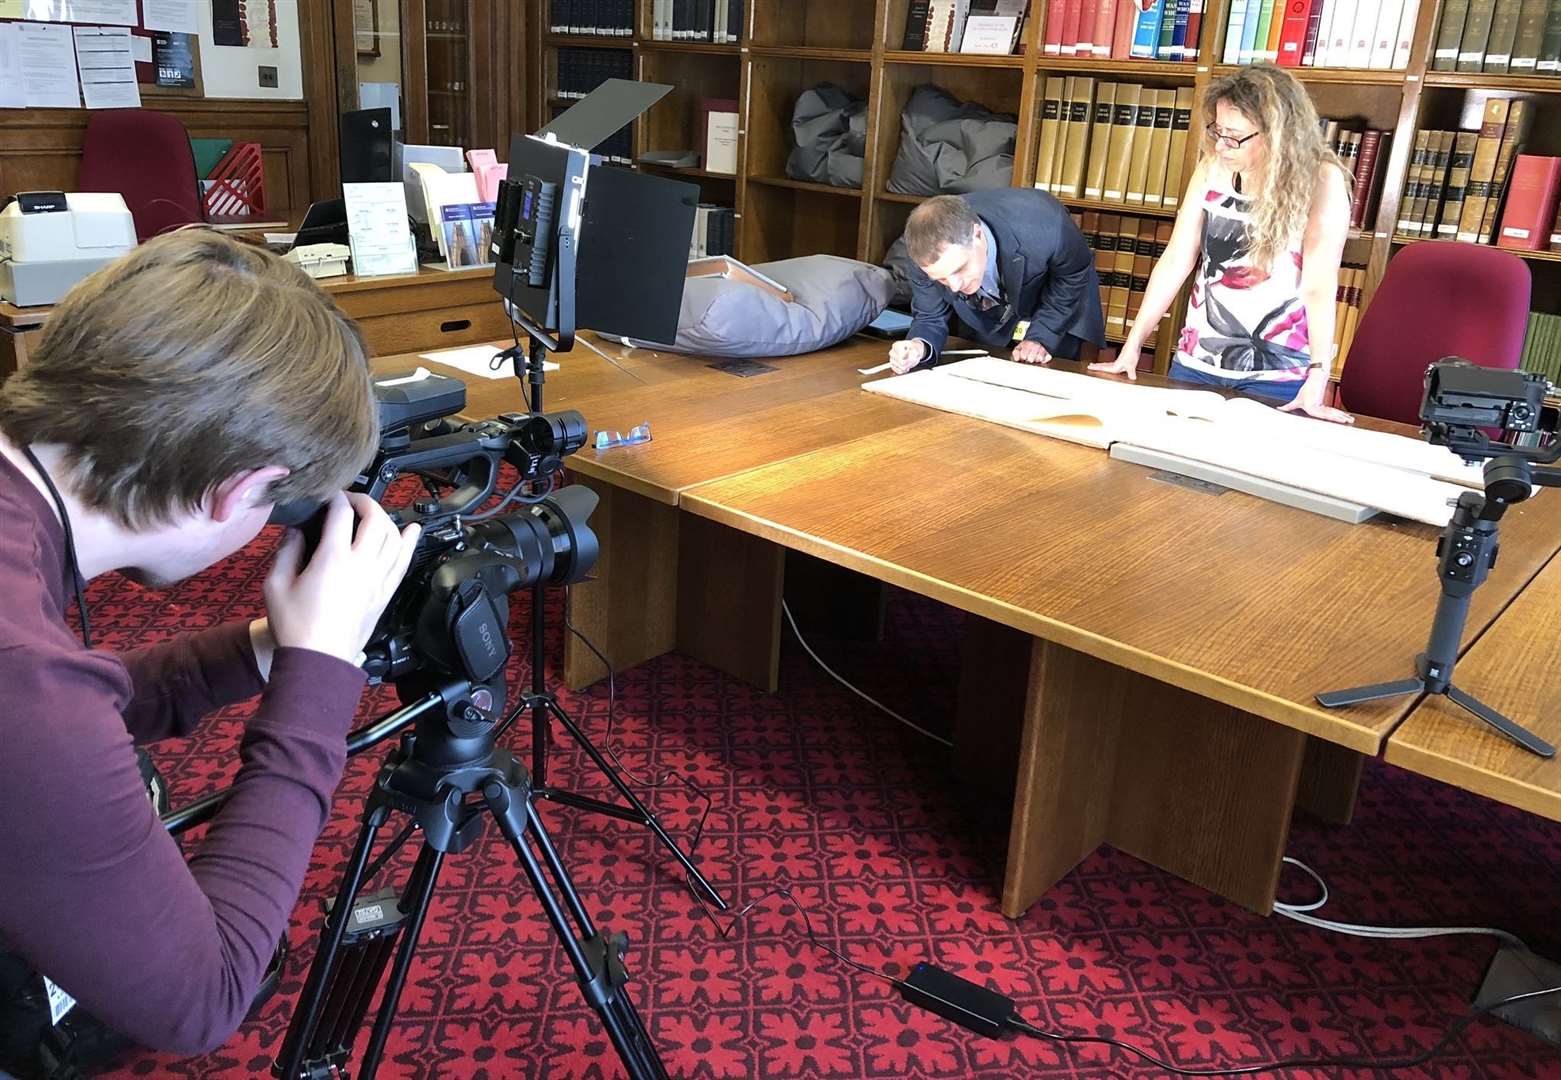 KMTV shot the documentary inside the Houses of Parliament